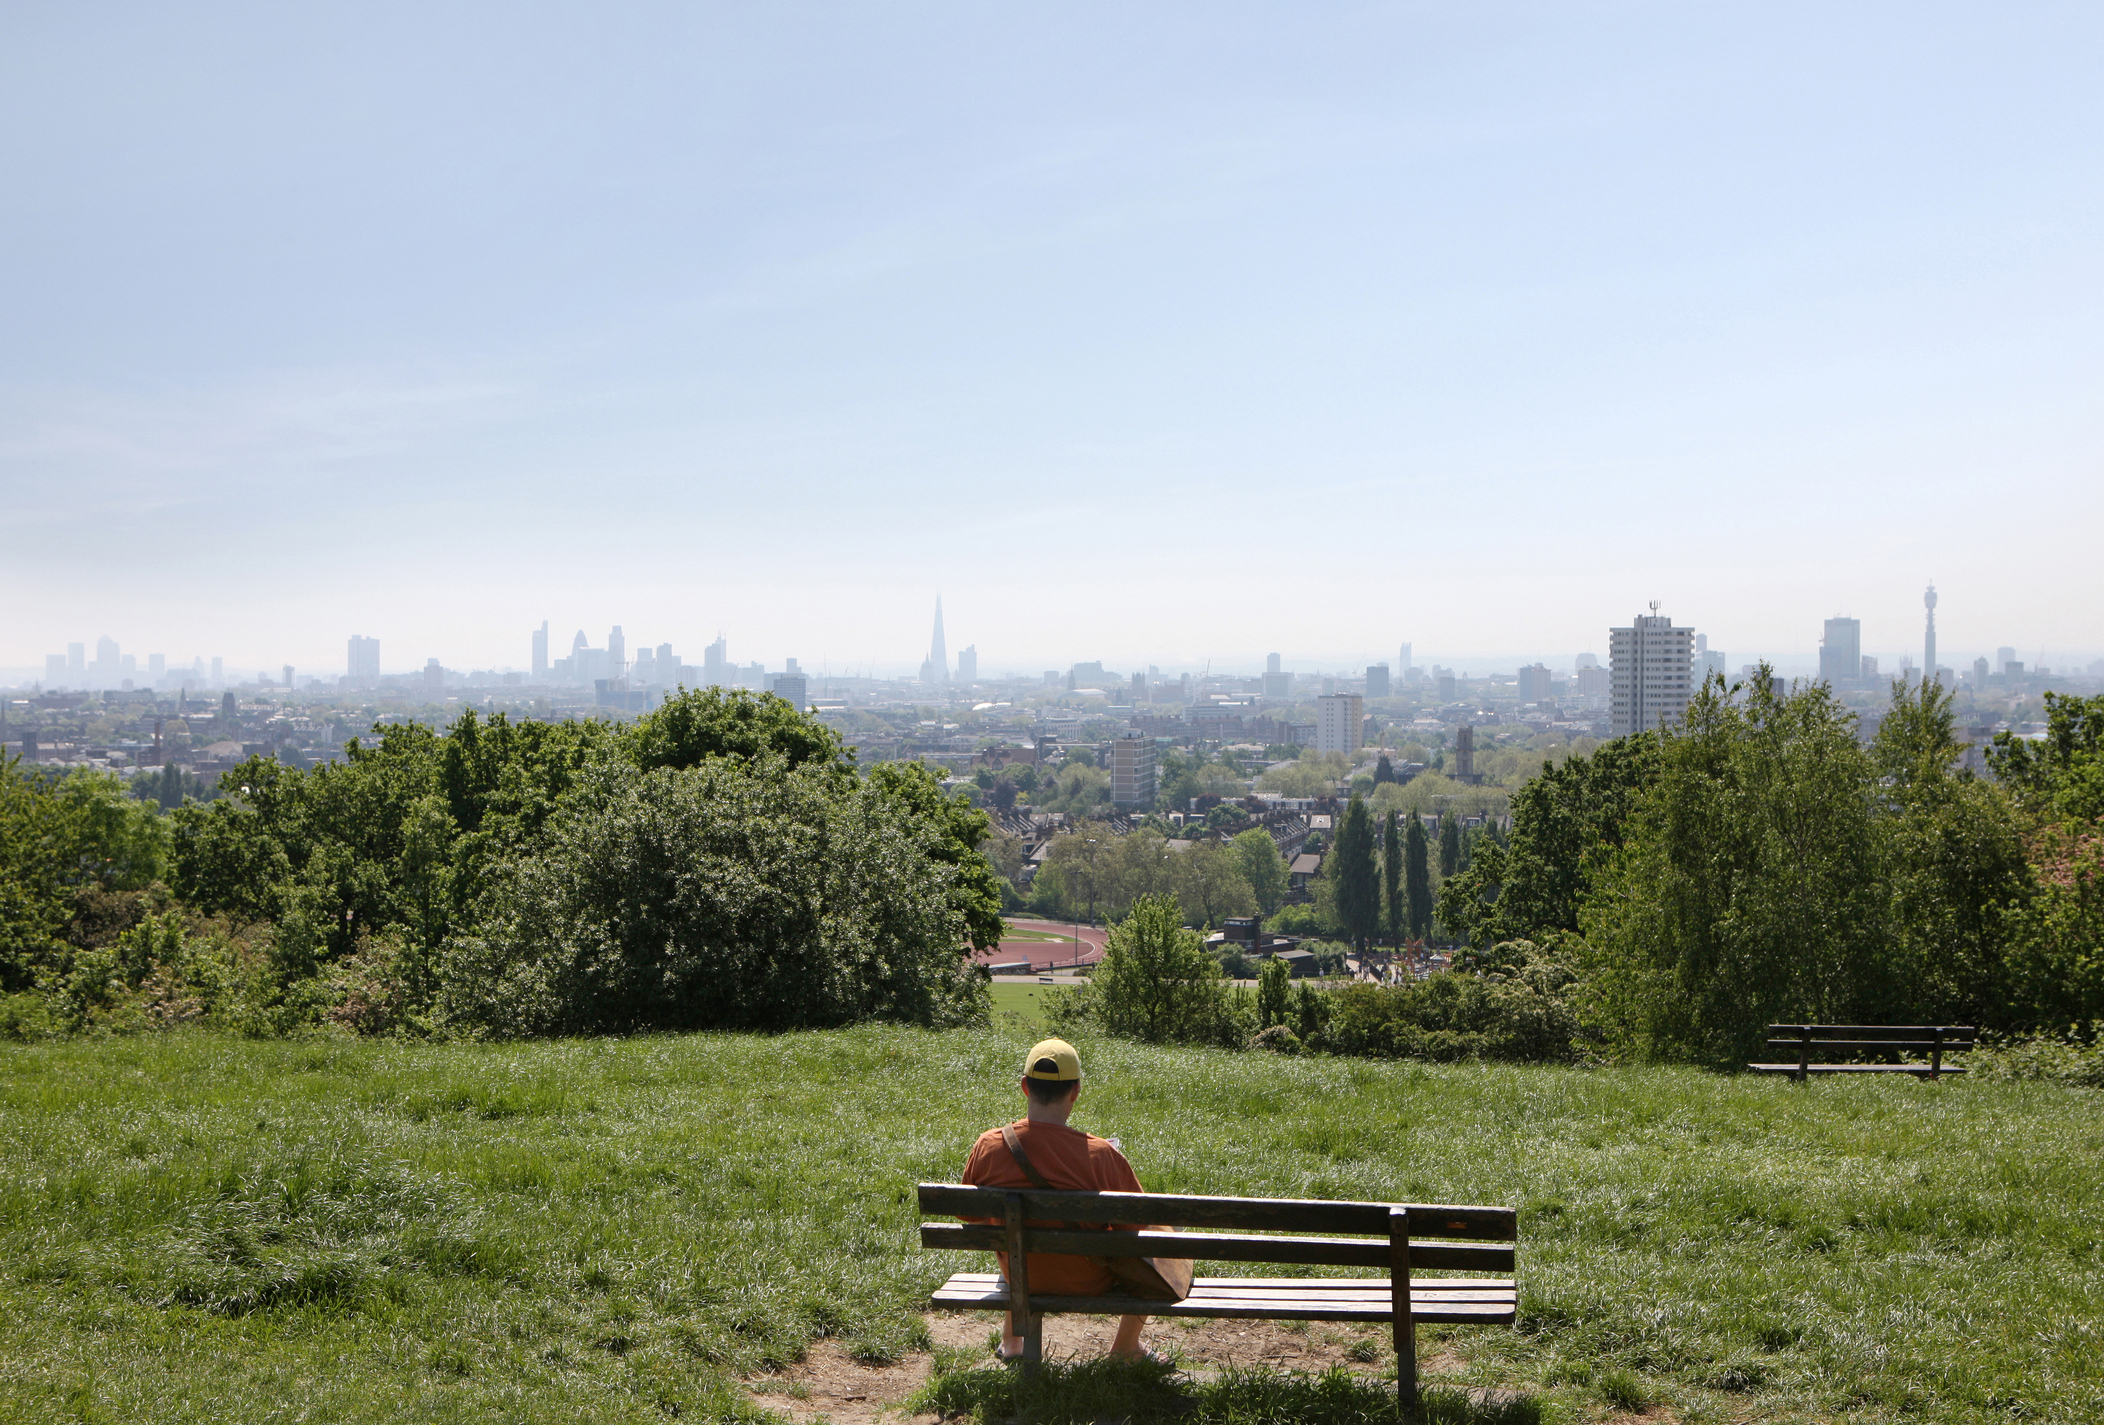 Person sitting on a park bench looking at a distant city skyline